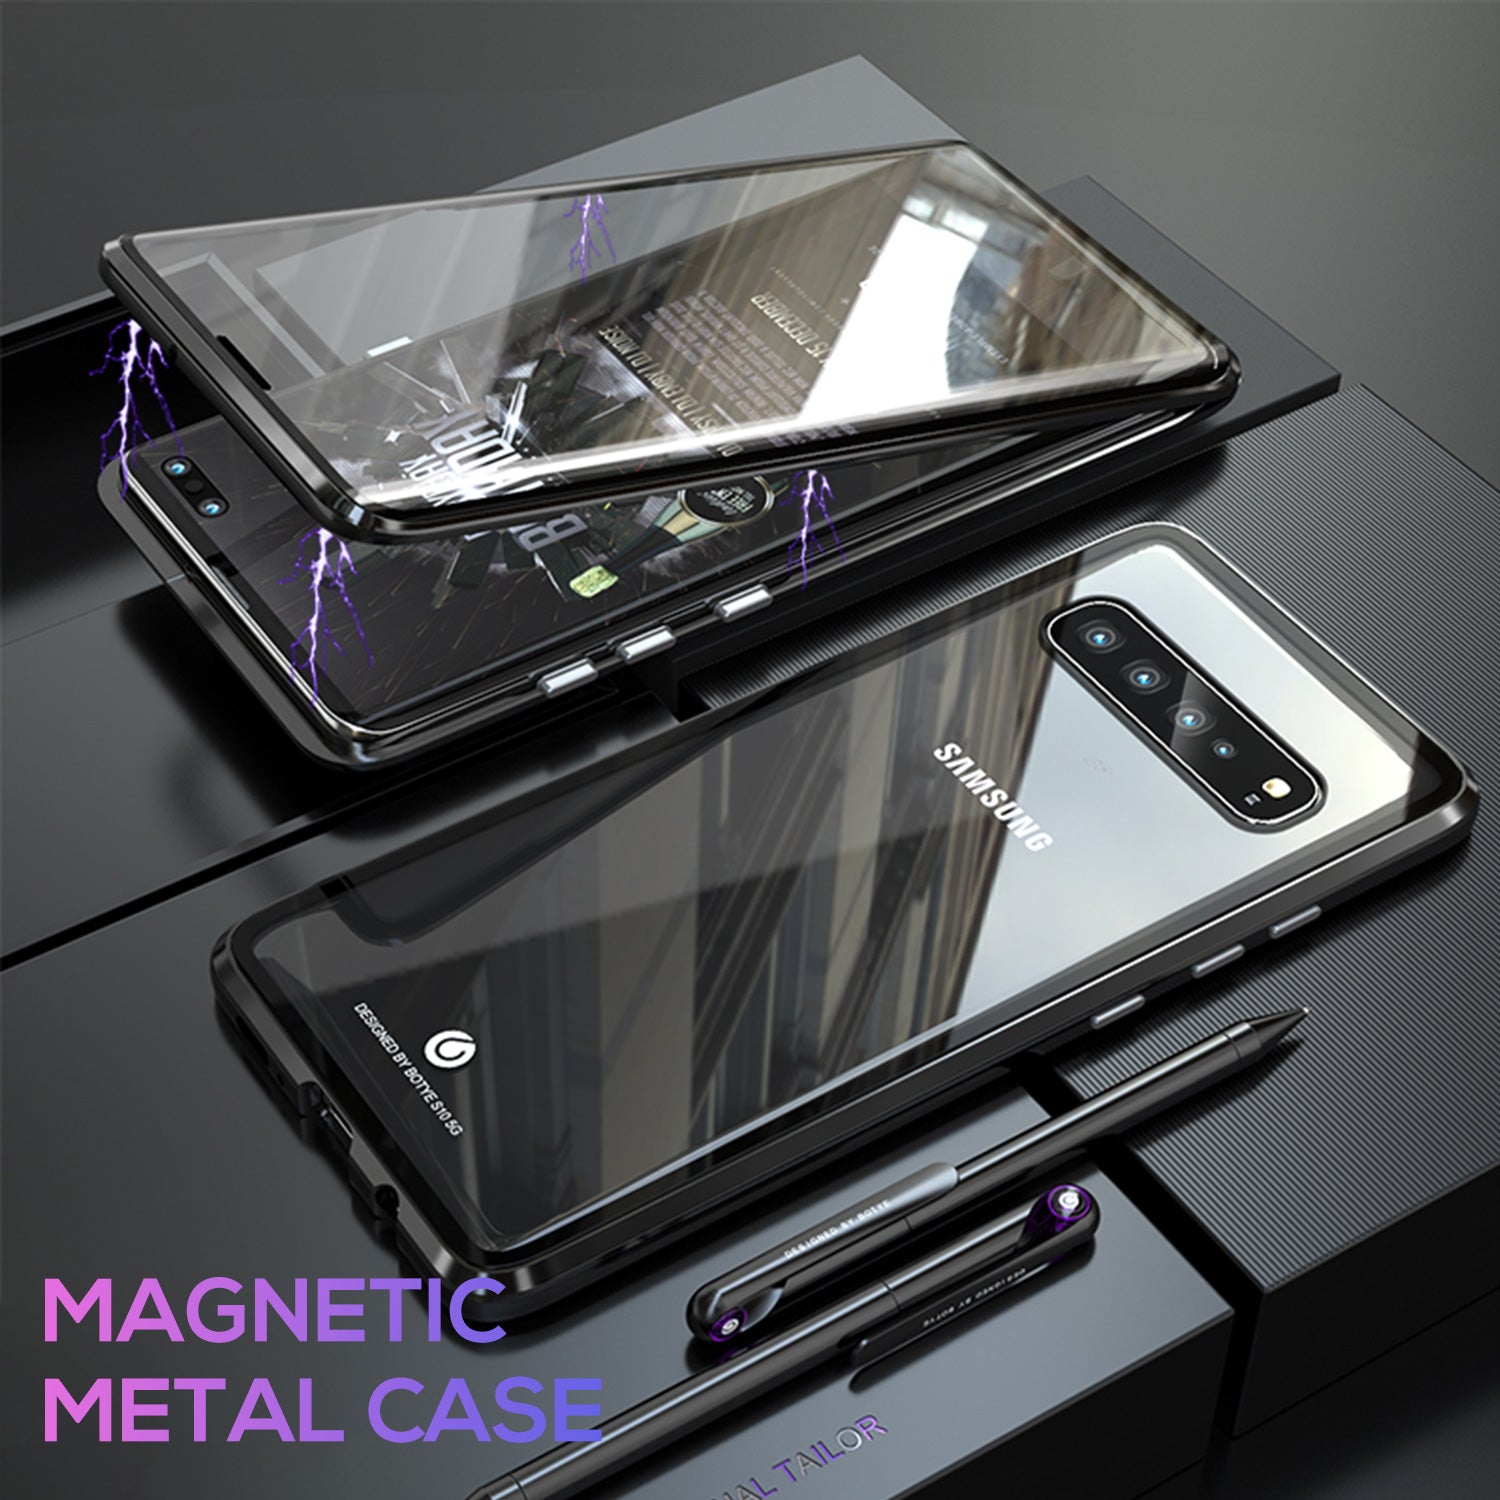 For Galaxy S9 Plus Magnetic Metal Tempered Glass Case Cover-Black, White, Red